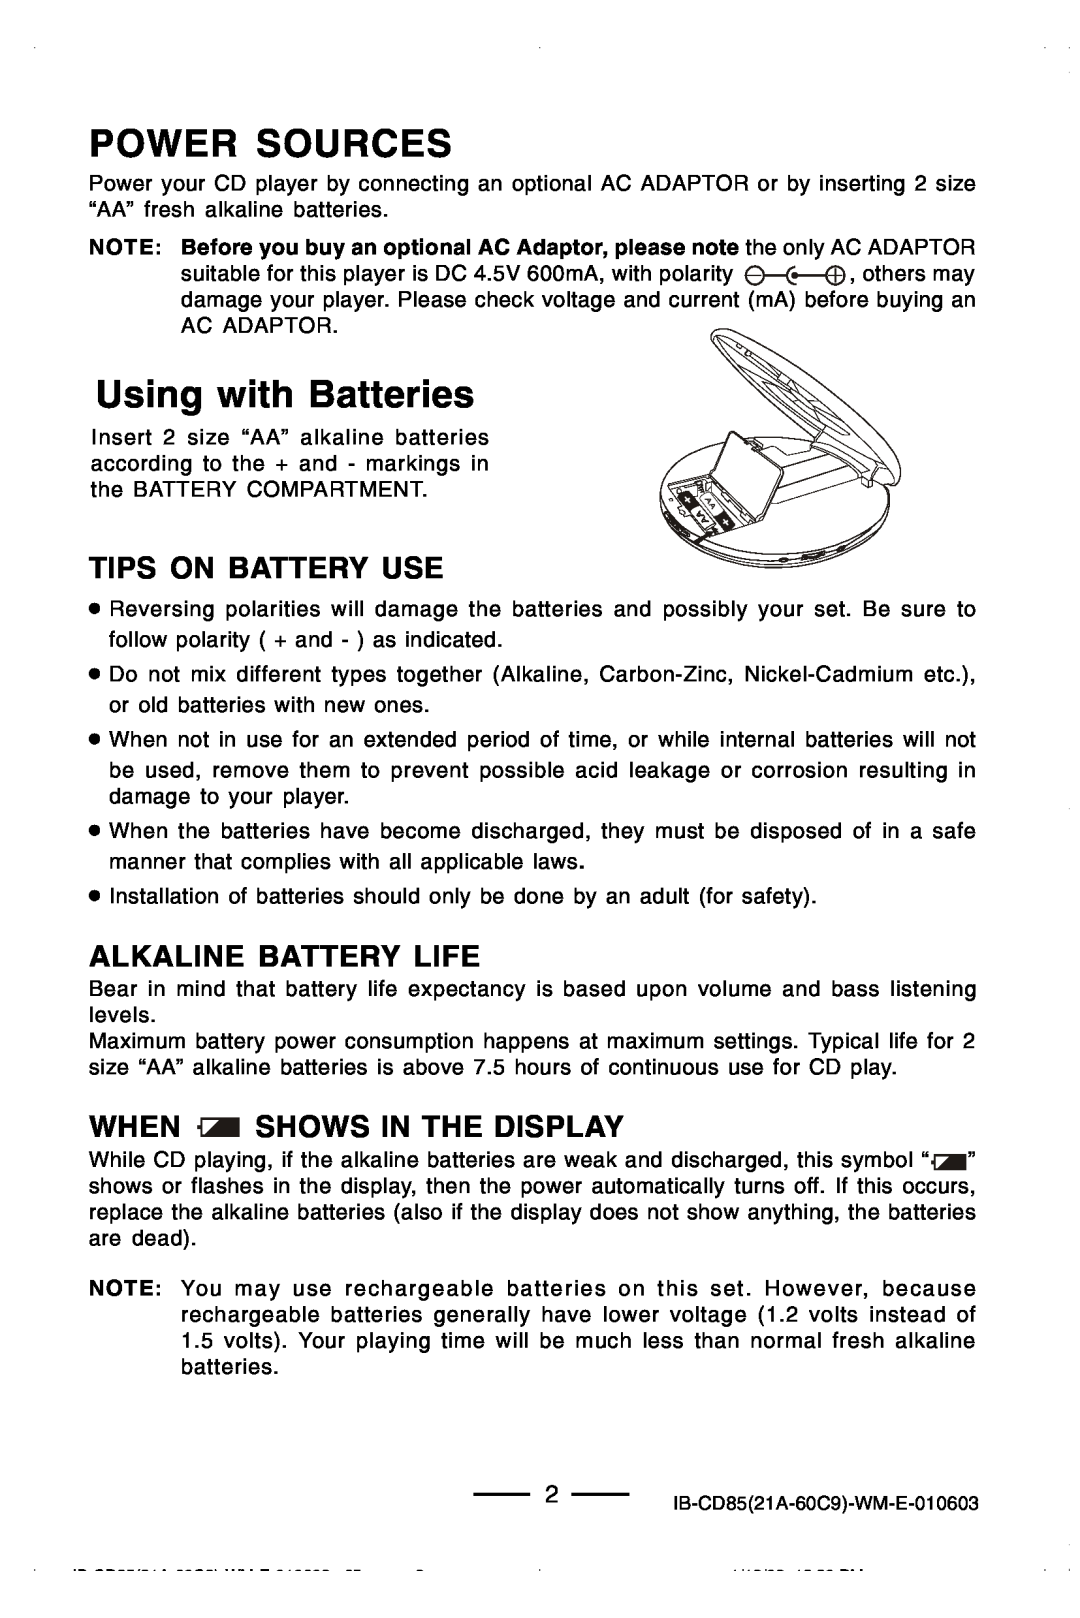 Lenoxx Electronics CD85 manual Power Sources, Using with Batteries, Tips On Battery Use, Alkaline Battery Life 